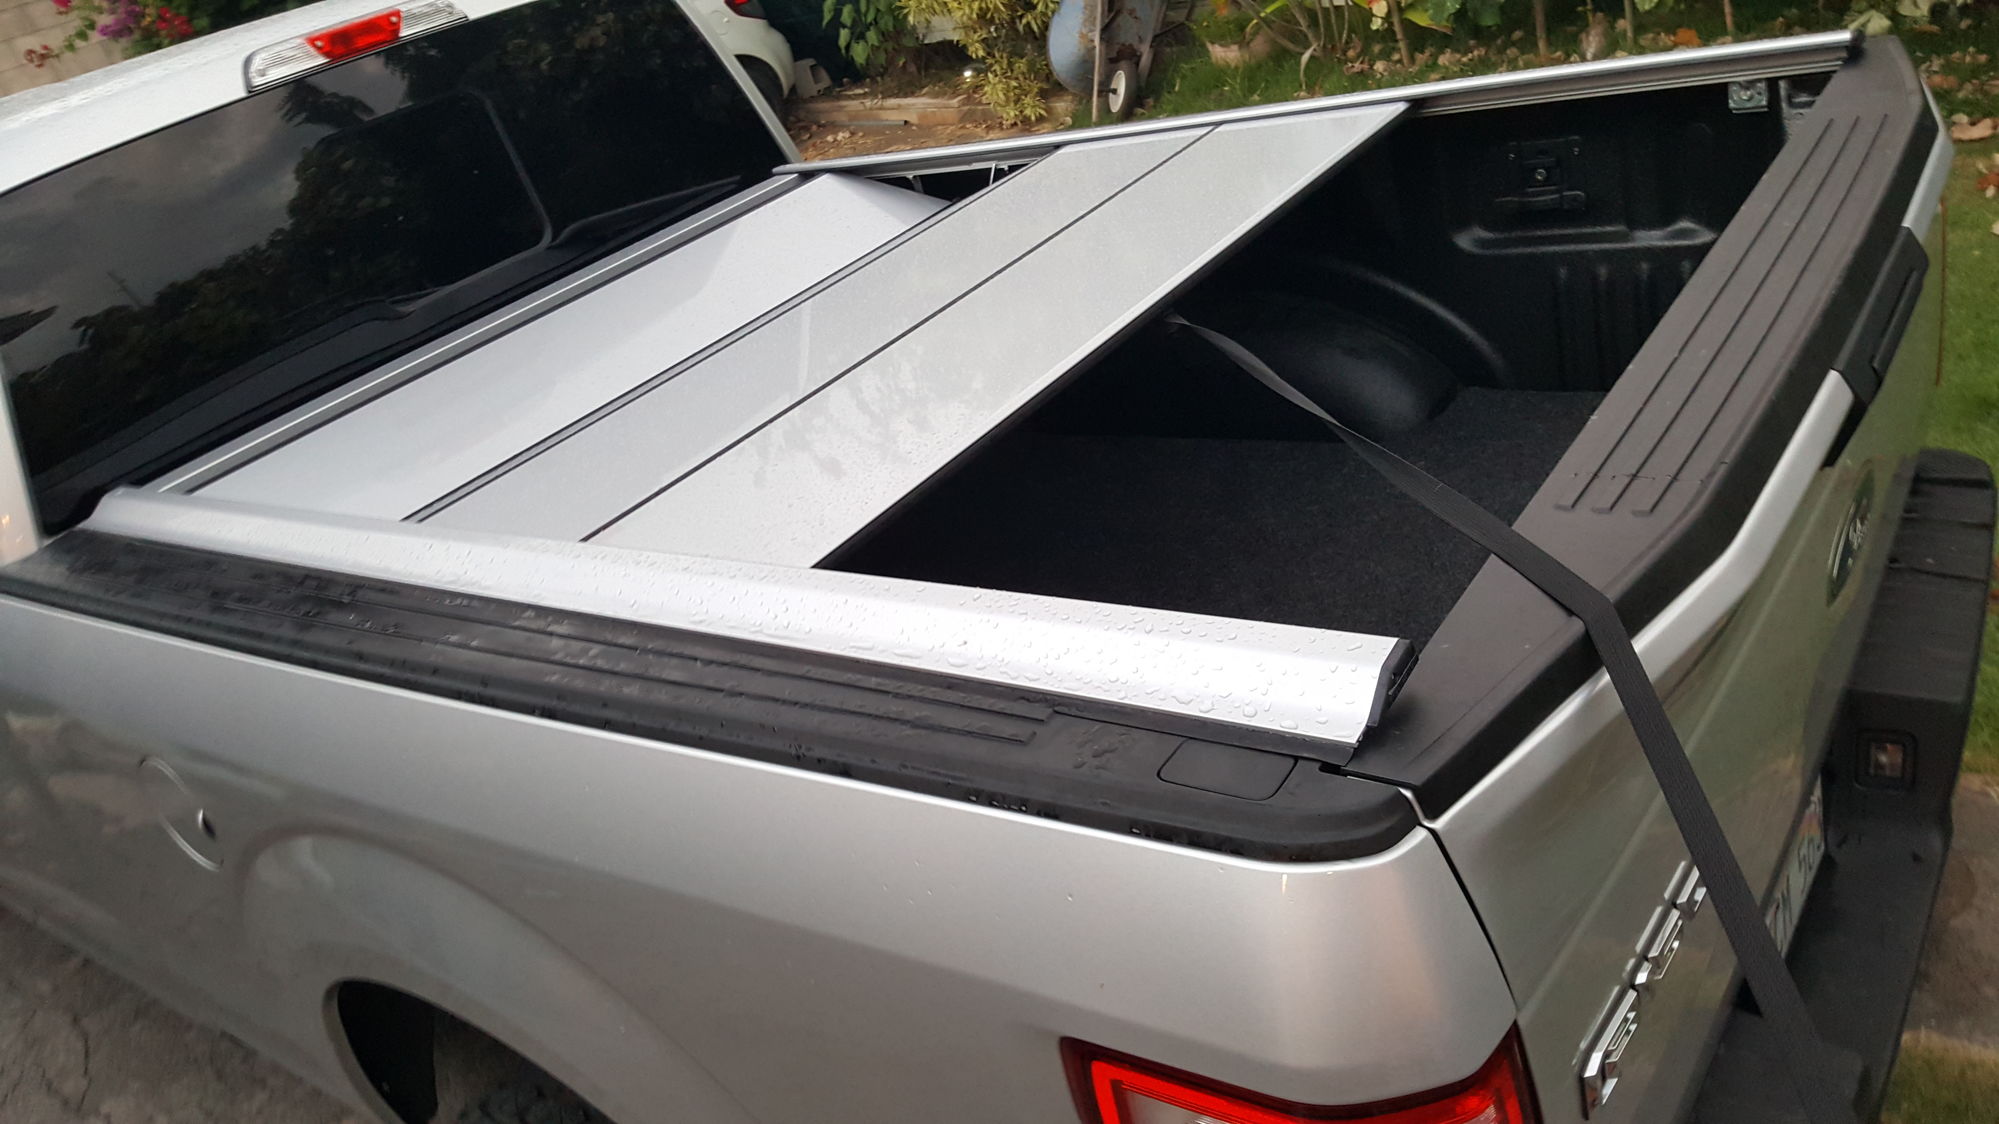 Peragon Truck Bed Cover Available for 2015 F150! Page 28 Ford F150 Forum Community of